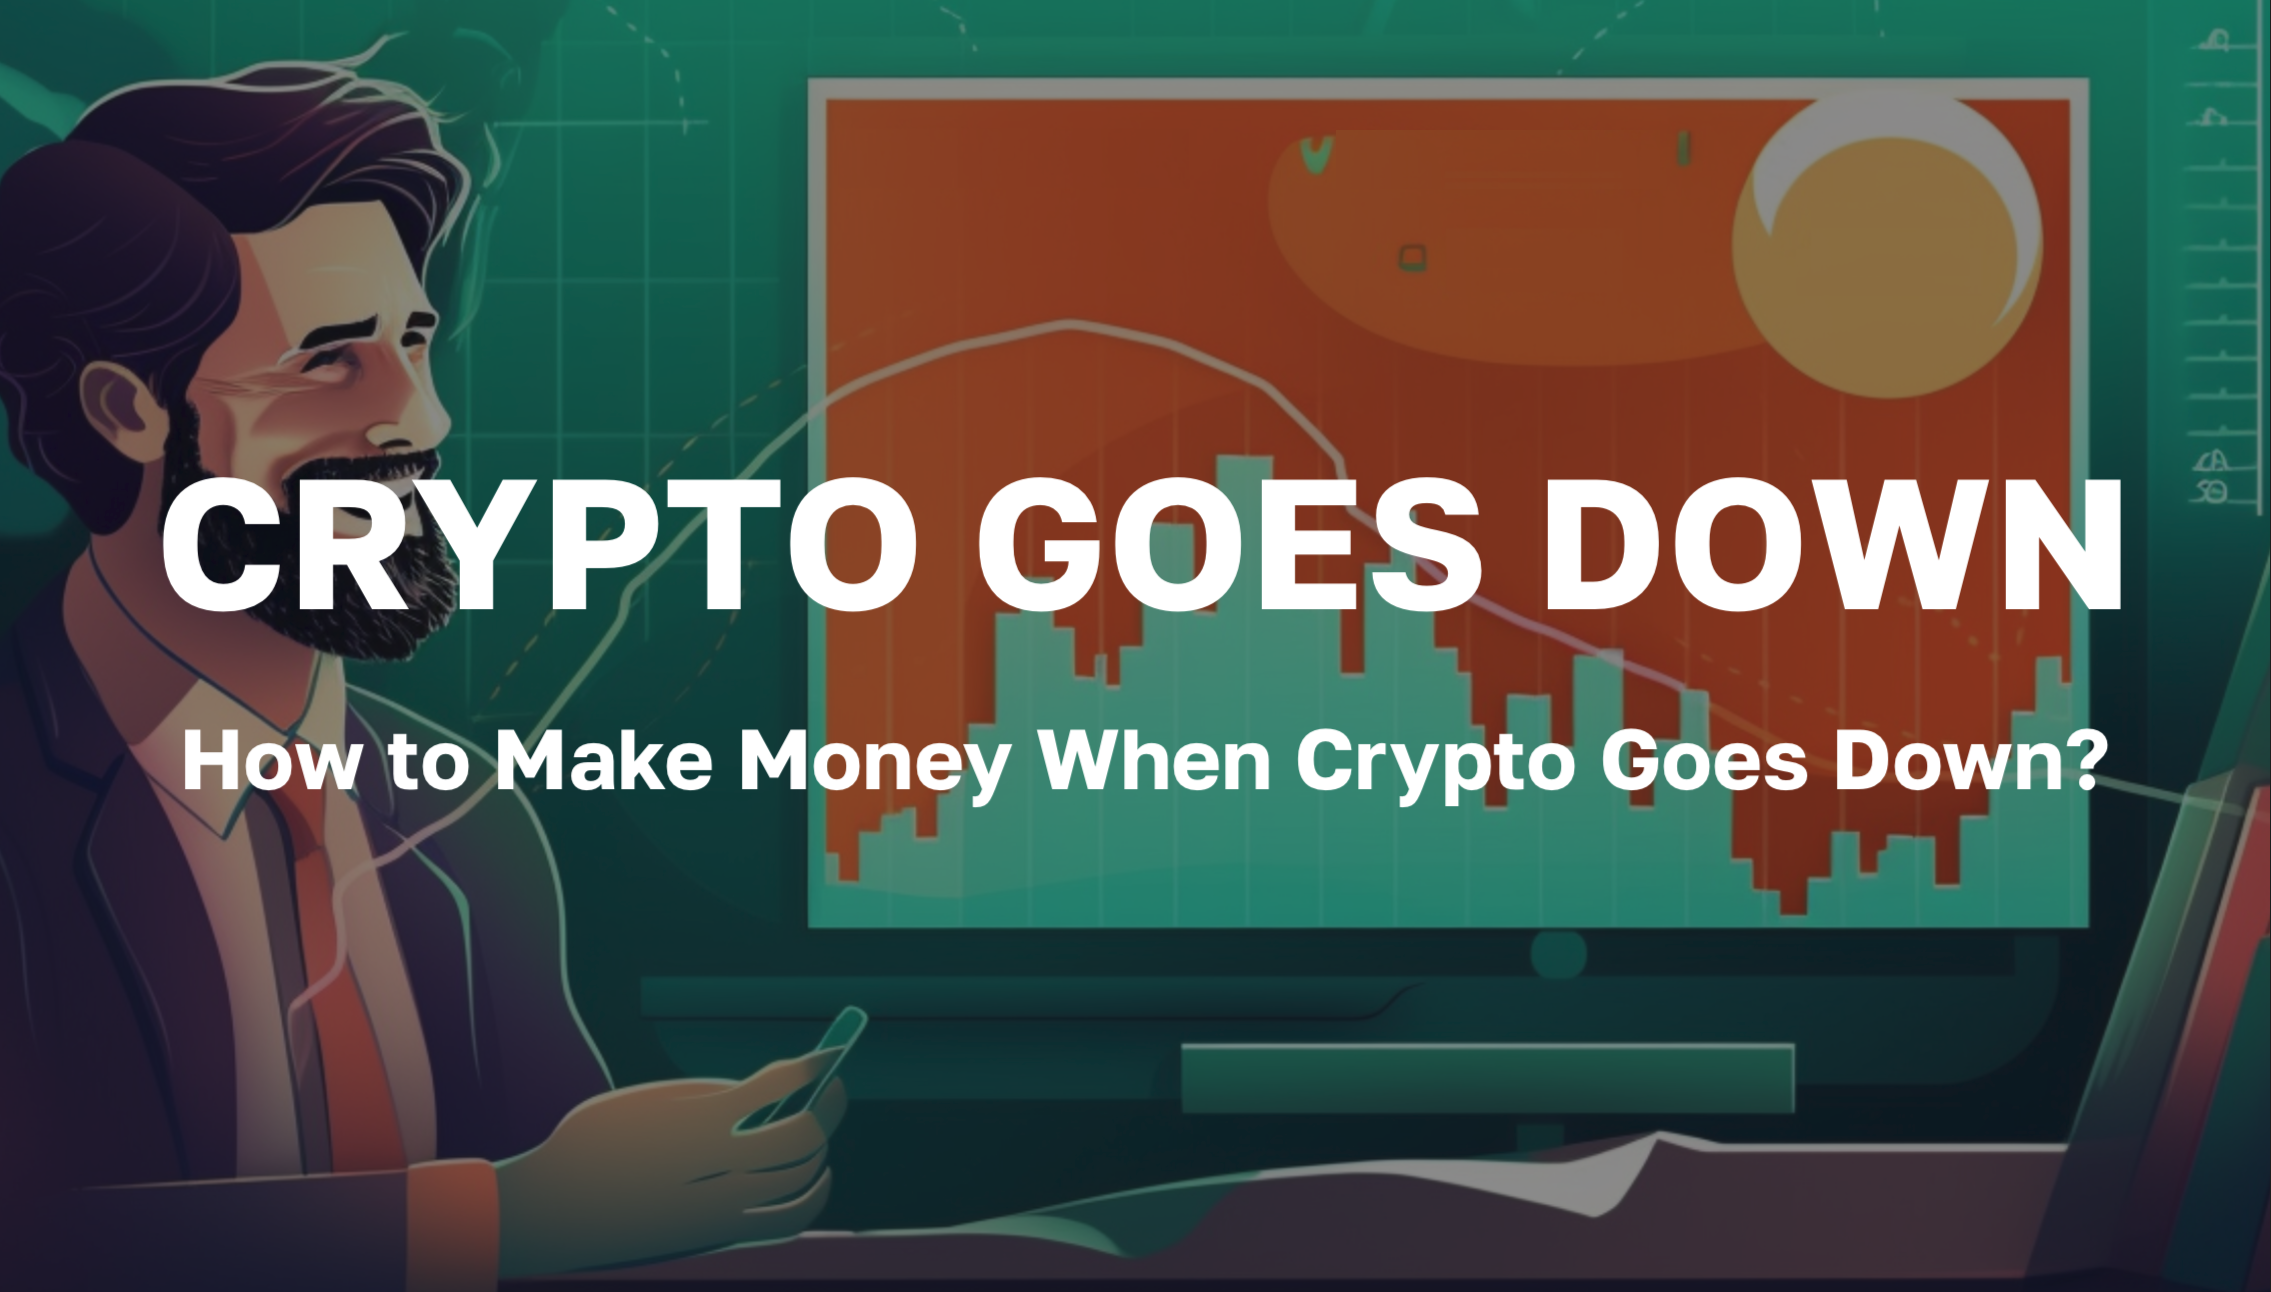 Crypto Goes Down - How to Make Money When Crypto Goes Down?